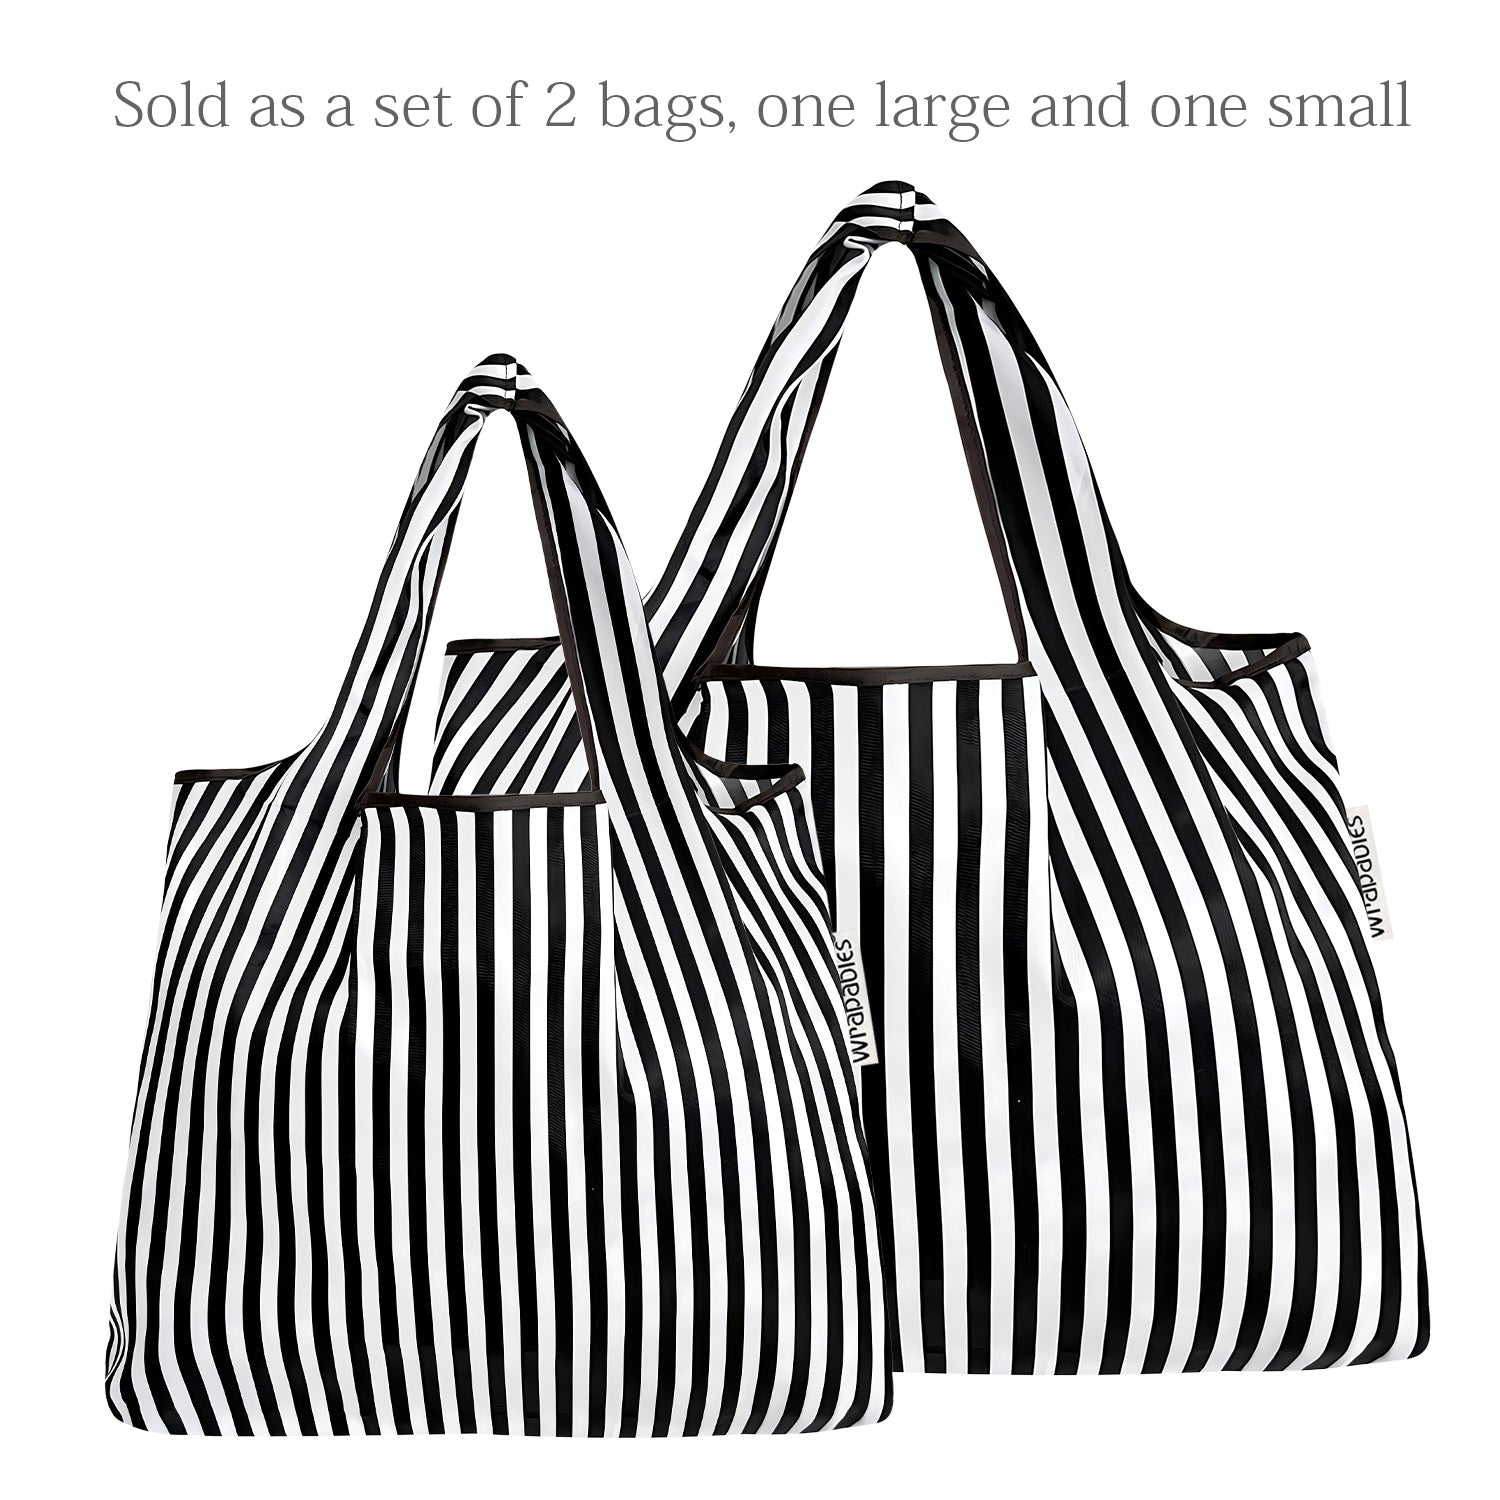 Cute Tote Bags Canvas Tote Bag for Women Aesthetic Reusable Grocery Shopping Bags Book Tote Bag Beach Bags, Women's, Size: One size, Cows